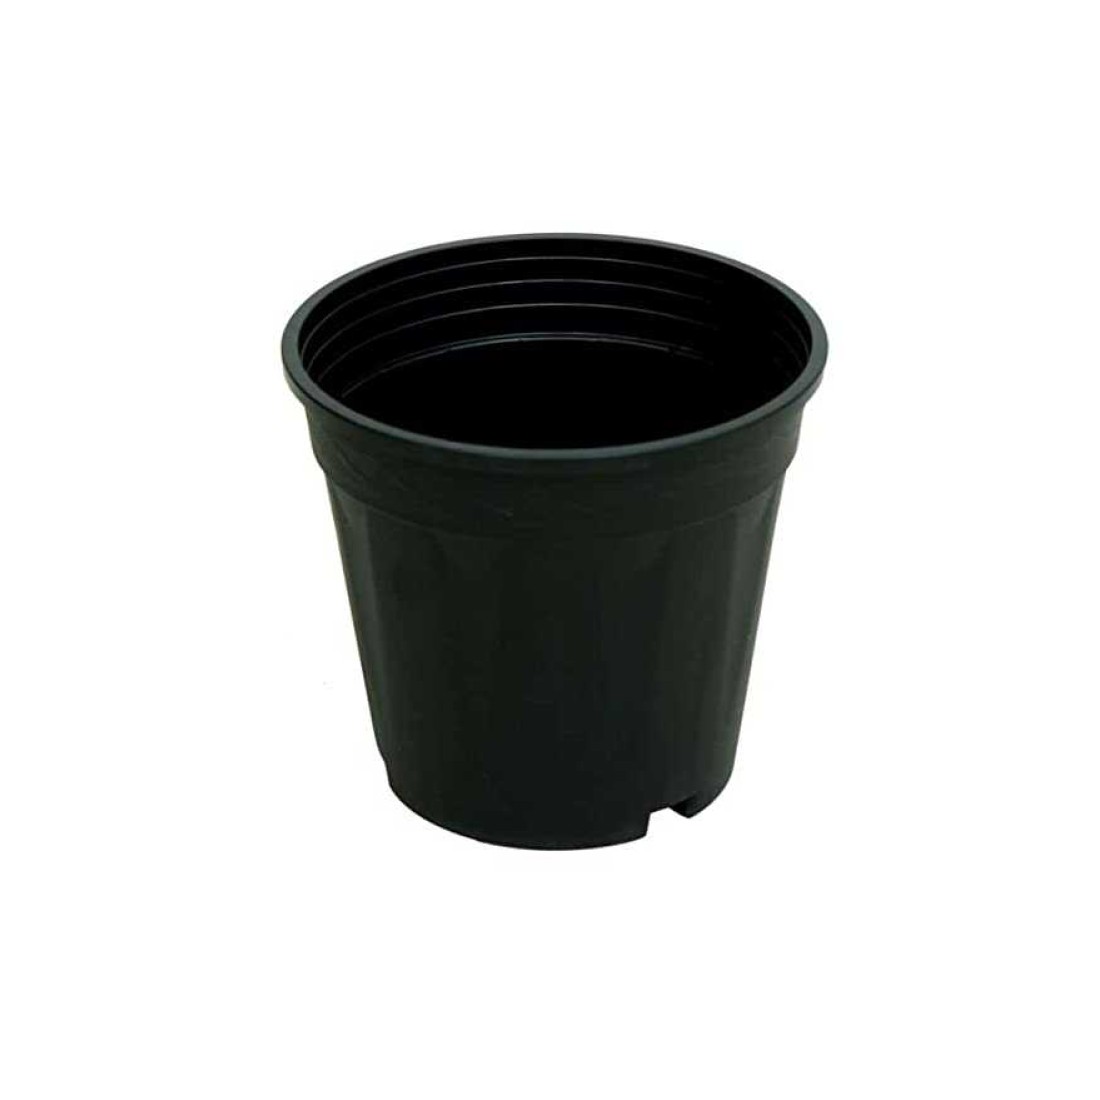 Round Black Nursery Plastic Pot /Grower Pot (size 6inches) pack of 25 pots 1